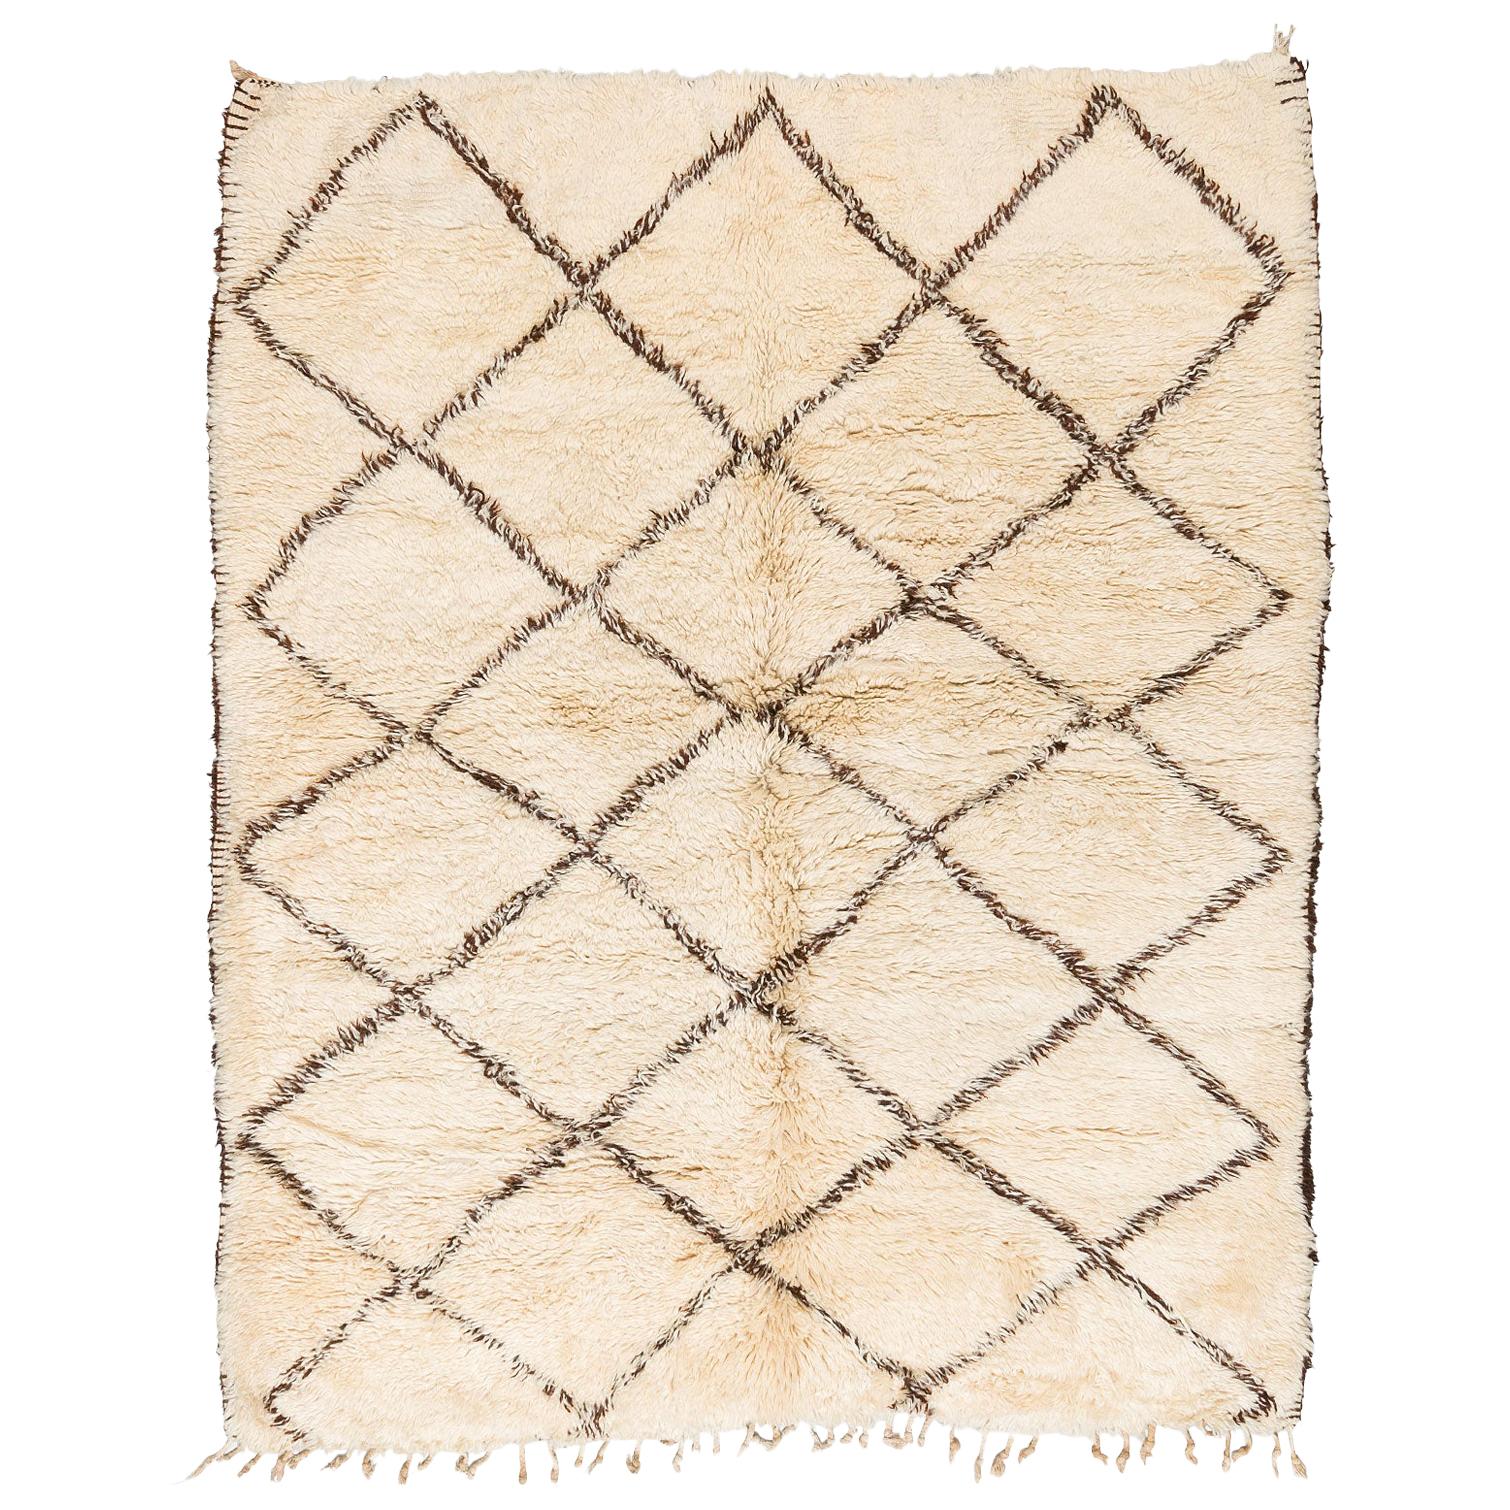 Vintage Moroccan Beni Ouarain Berber Rug with Brown Pattern on White Background